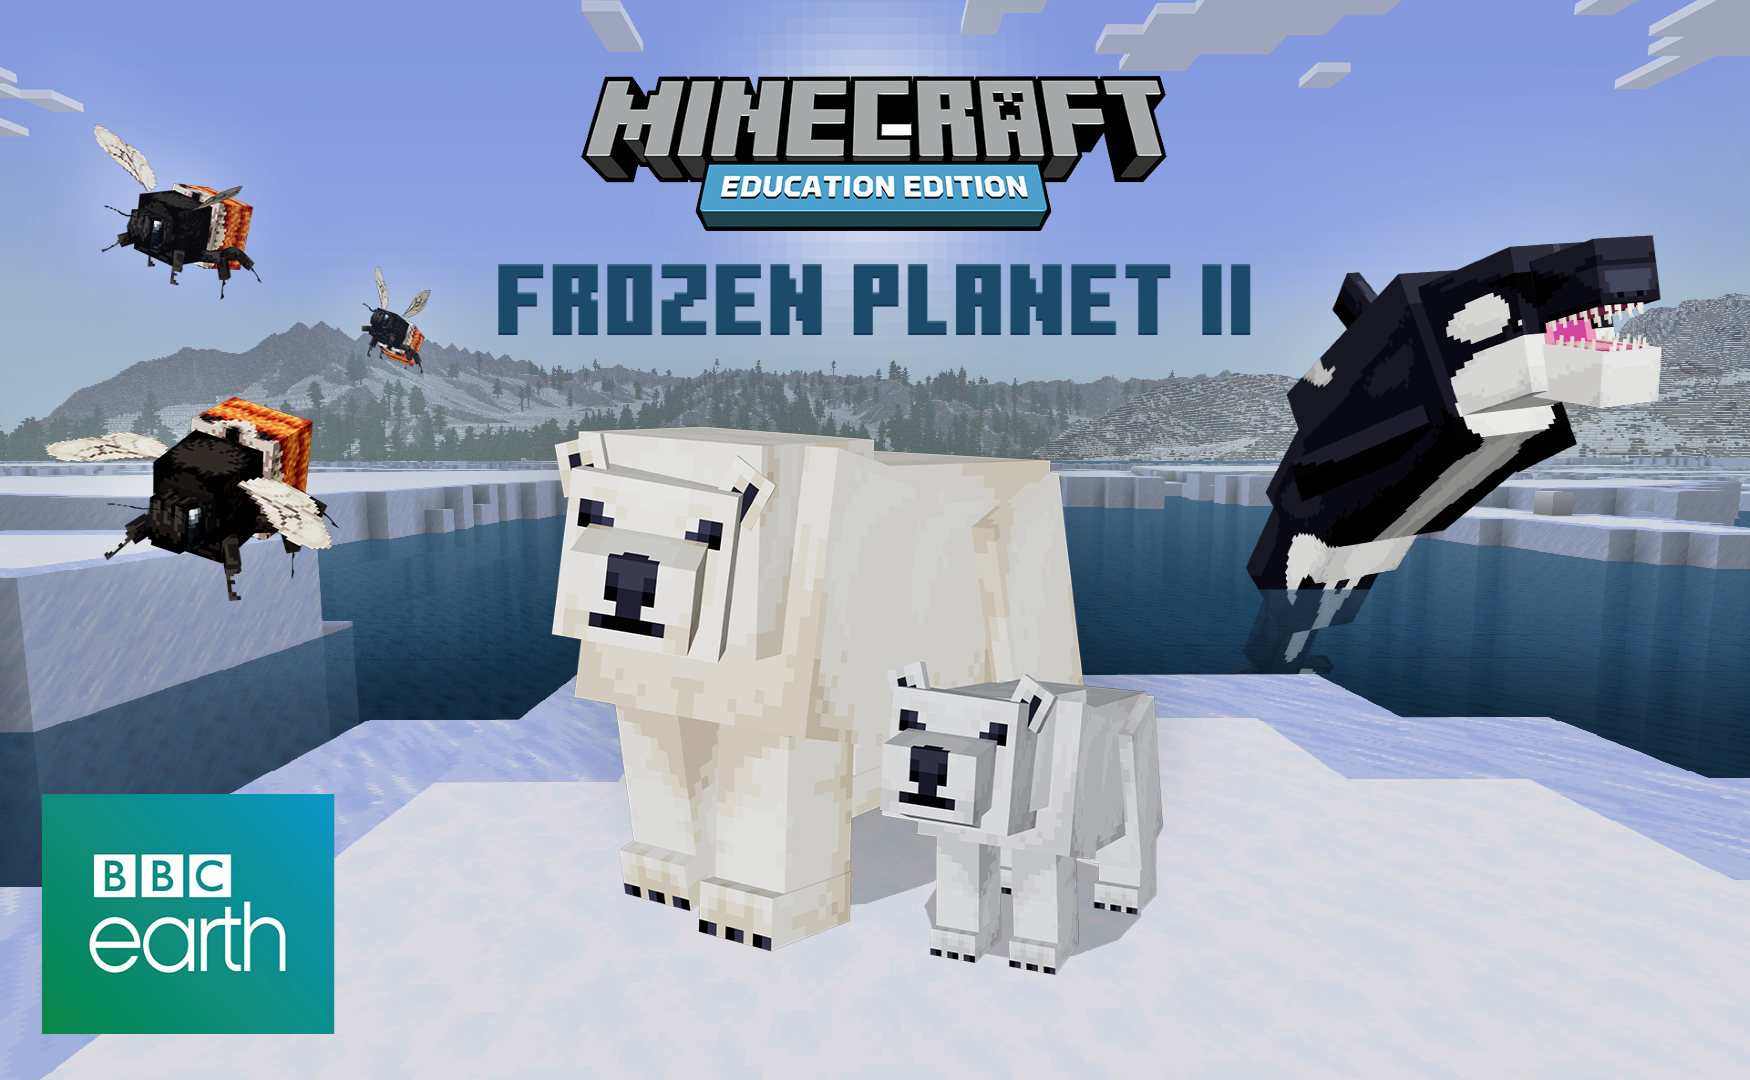 Xbox and Minecraft partner with BBC Earth to create Frozen Planet II worlds